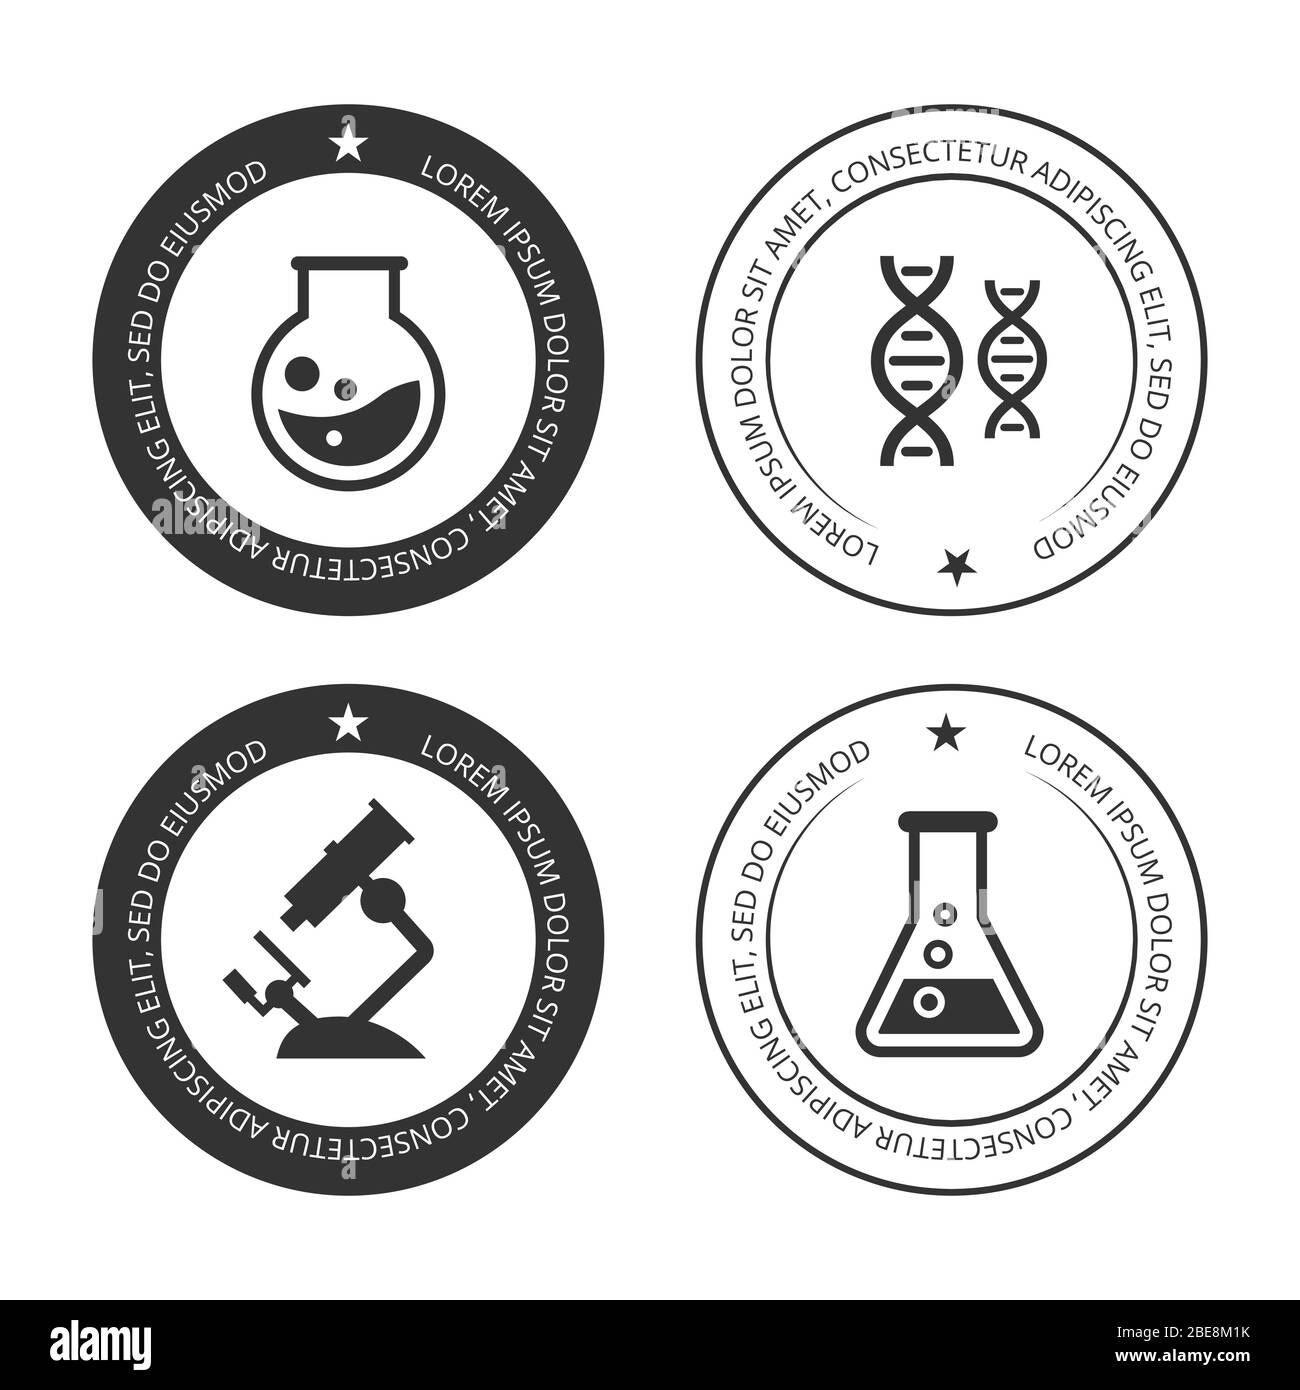 Science labels collection with silhouette icons. Illustration of symbol element vector Stock Vector